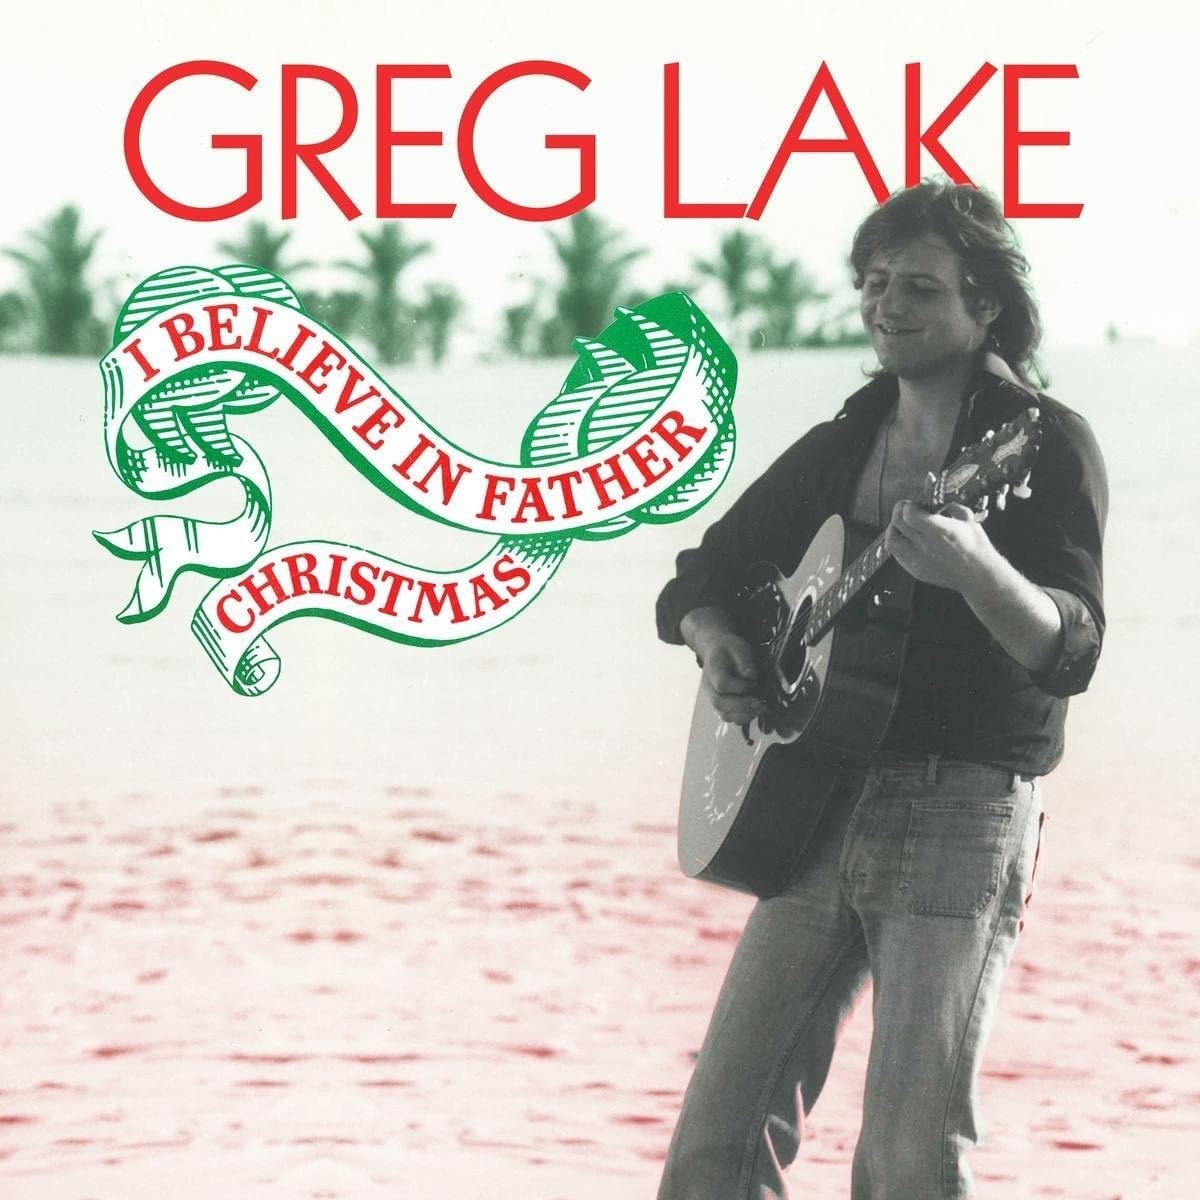 LAKE, GREG - I BELIEVE IN FATHER CHRISTMAS, Vinyl